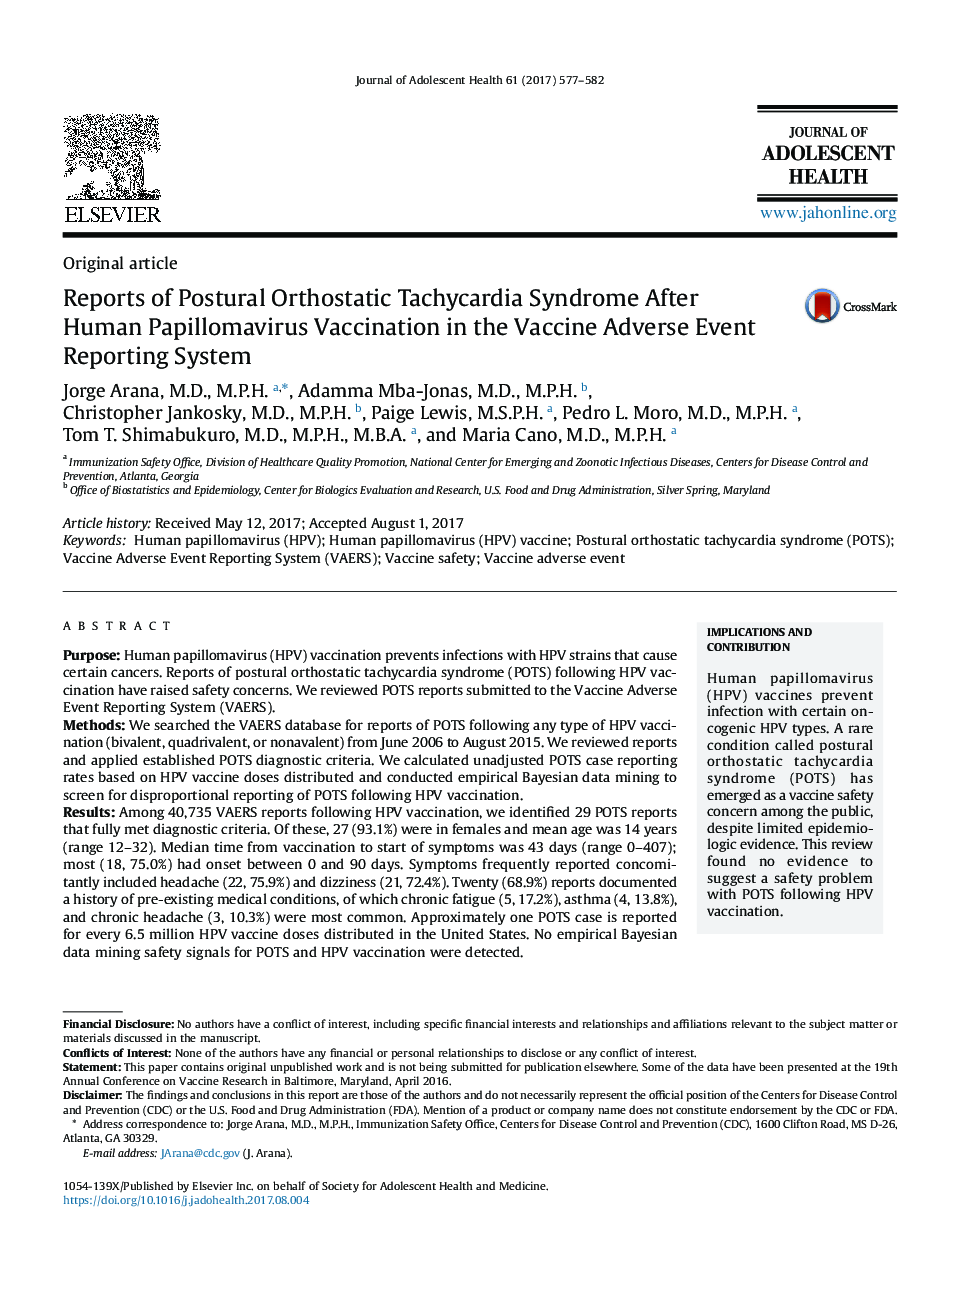 Reports of Postural Orthostatic Tachycardia Syndrome After Human Papillomavirus Vaccination in the Vaccine Adverse Event Reporting System